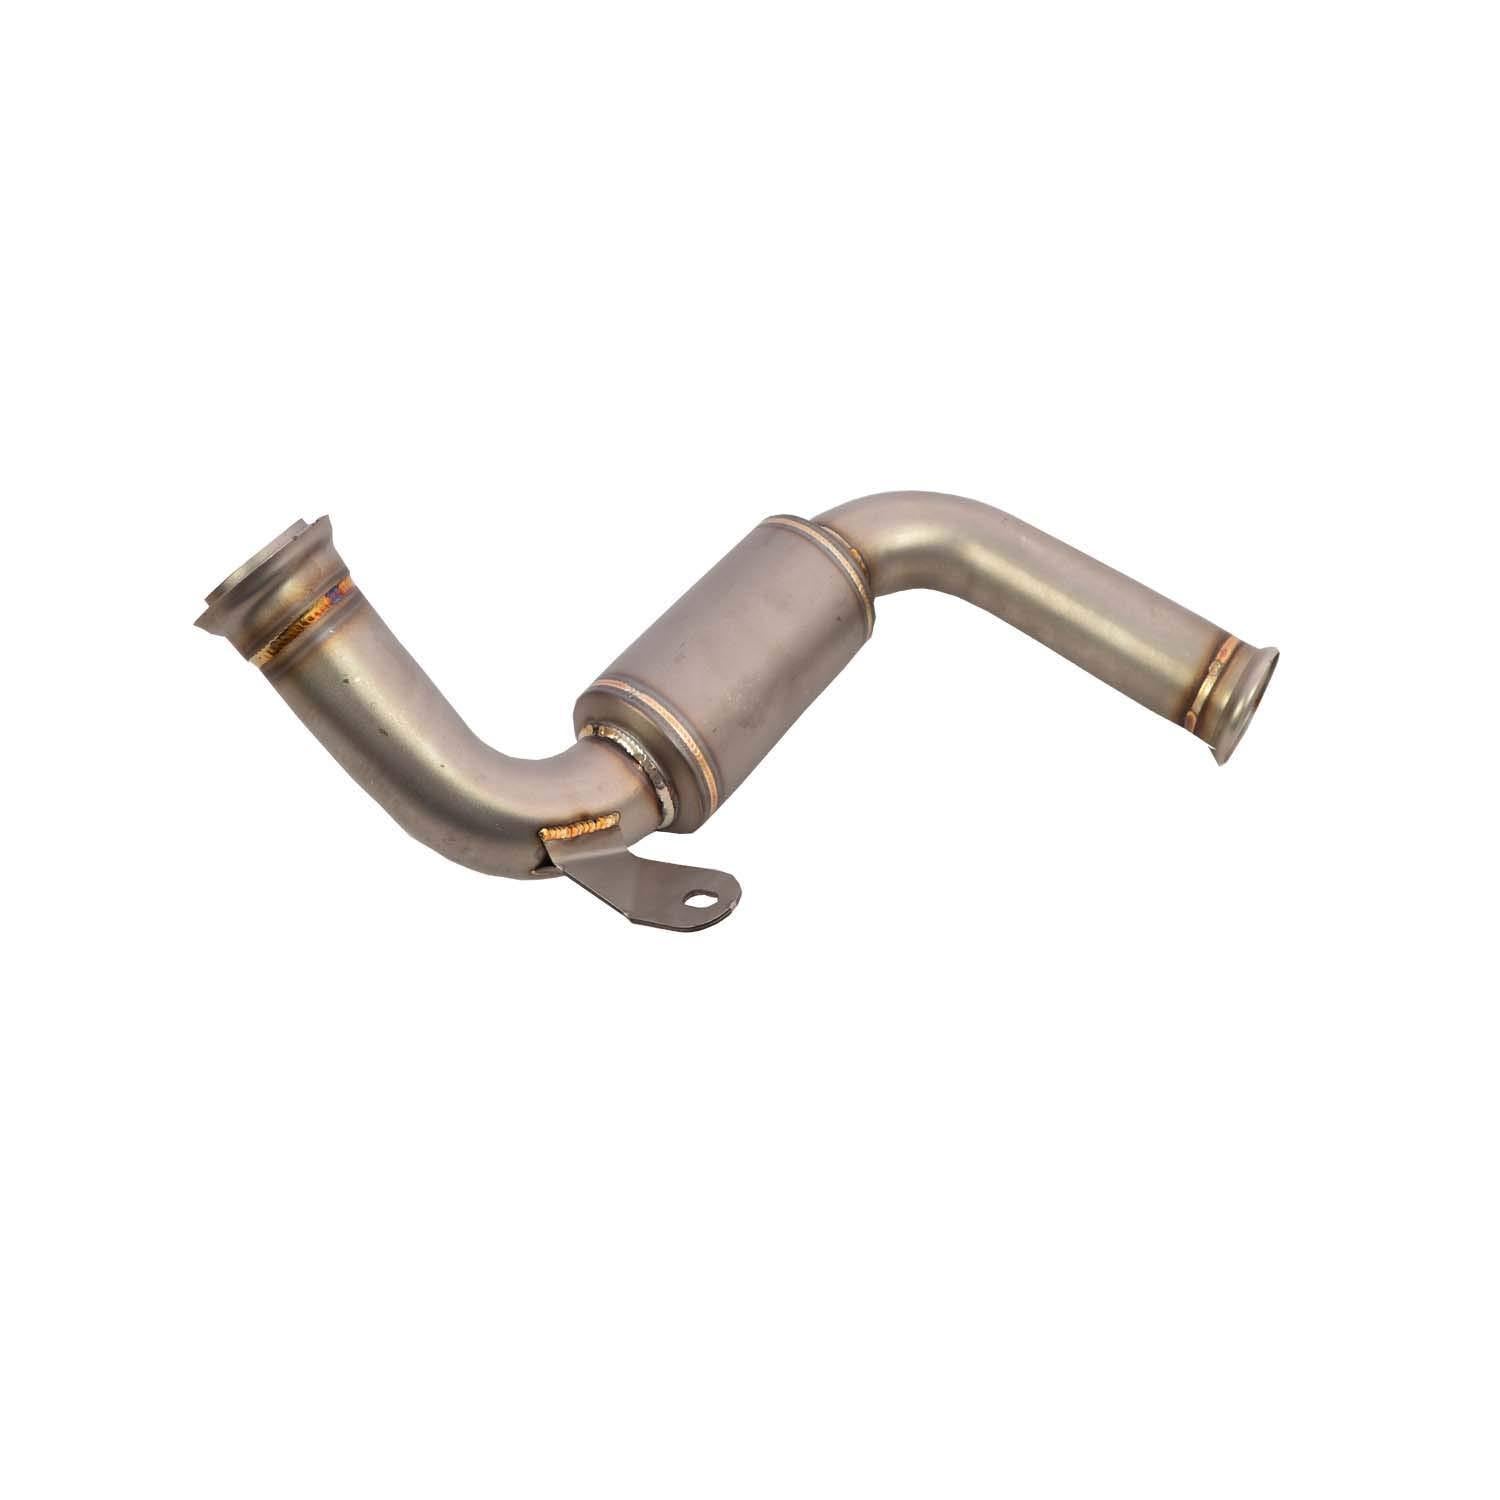 KTM Duke Bendpipe for 200, 250, 390cc with catalytic converter - Premium Bend Pipes from Sparewick - Just Rs. 3990! Shop now at Sparewick